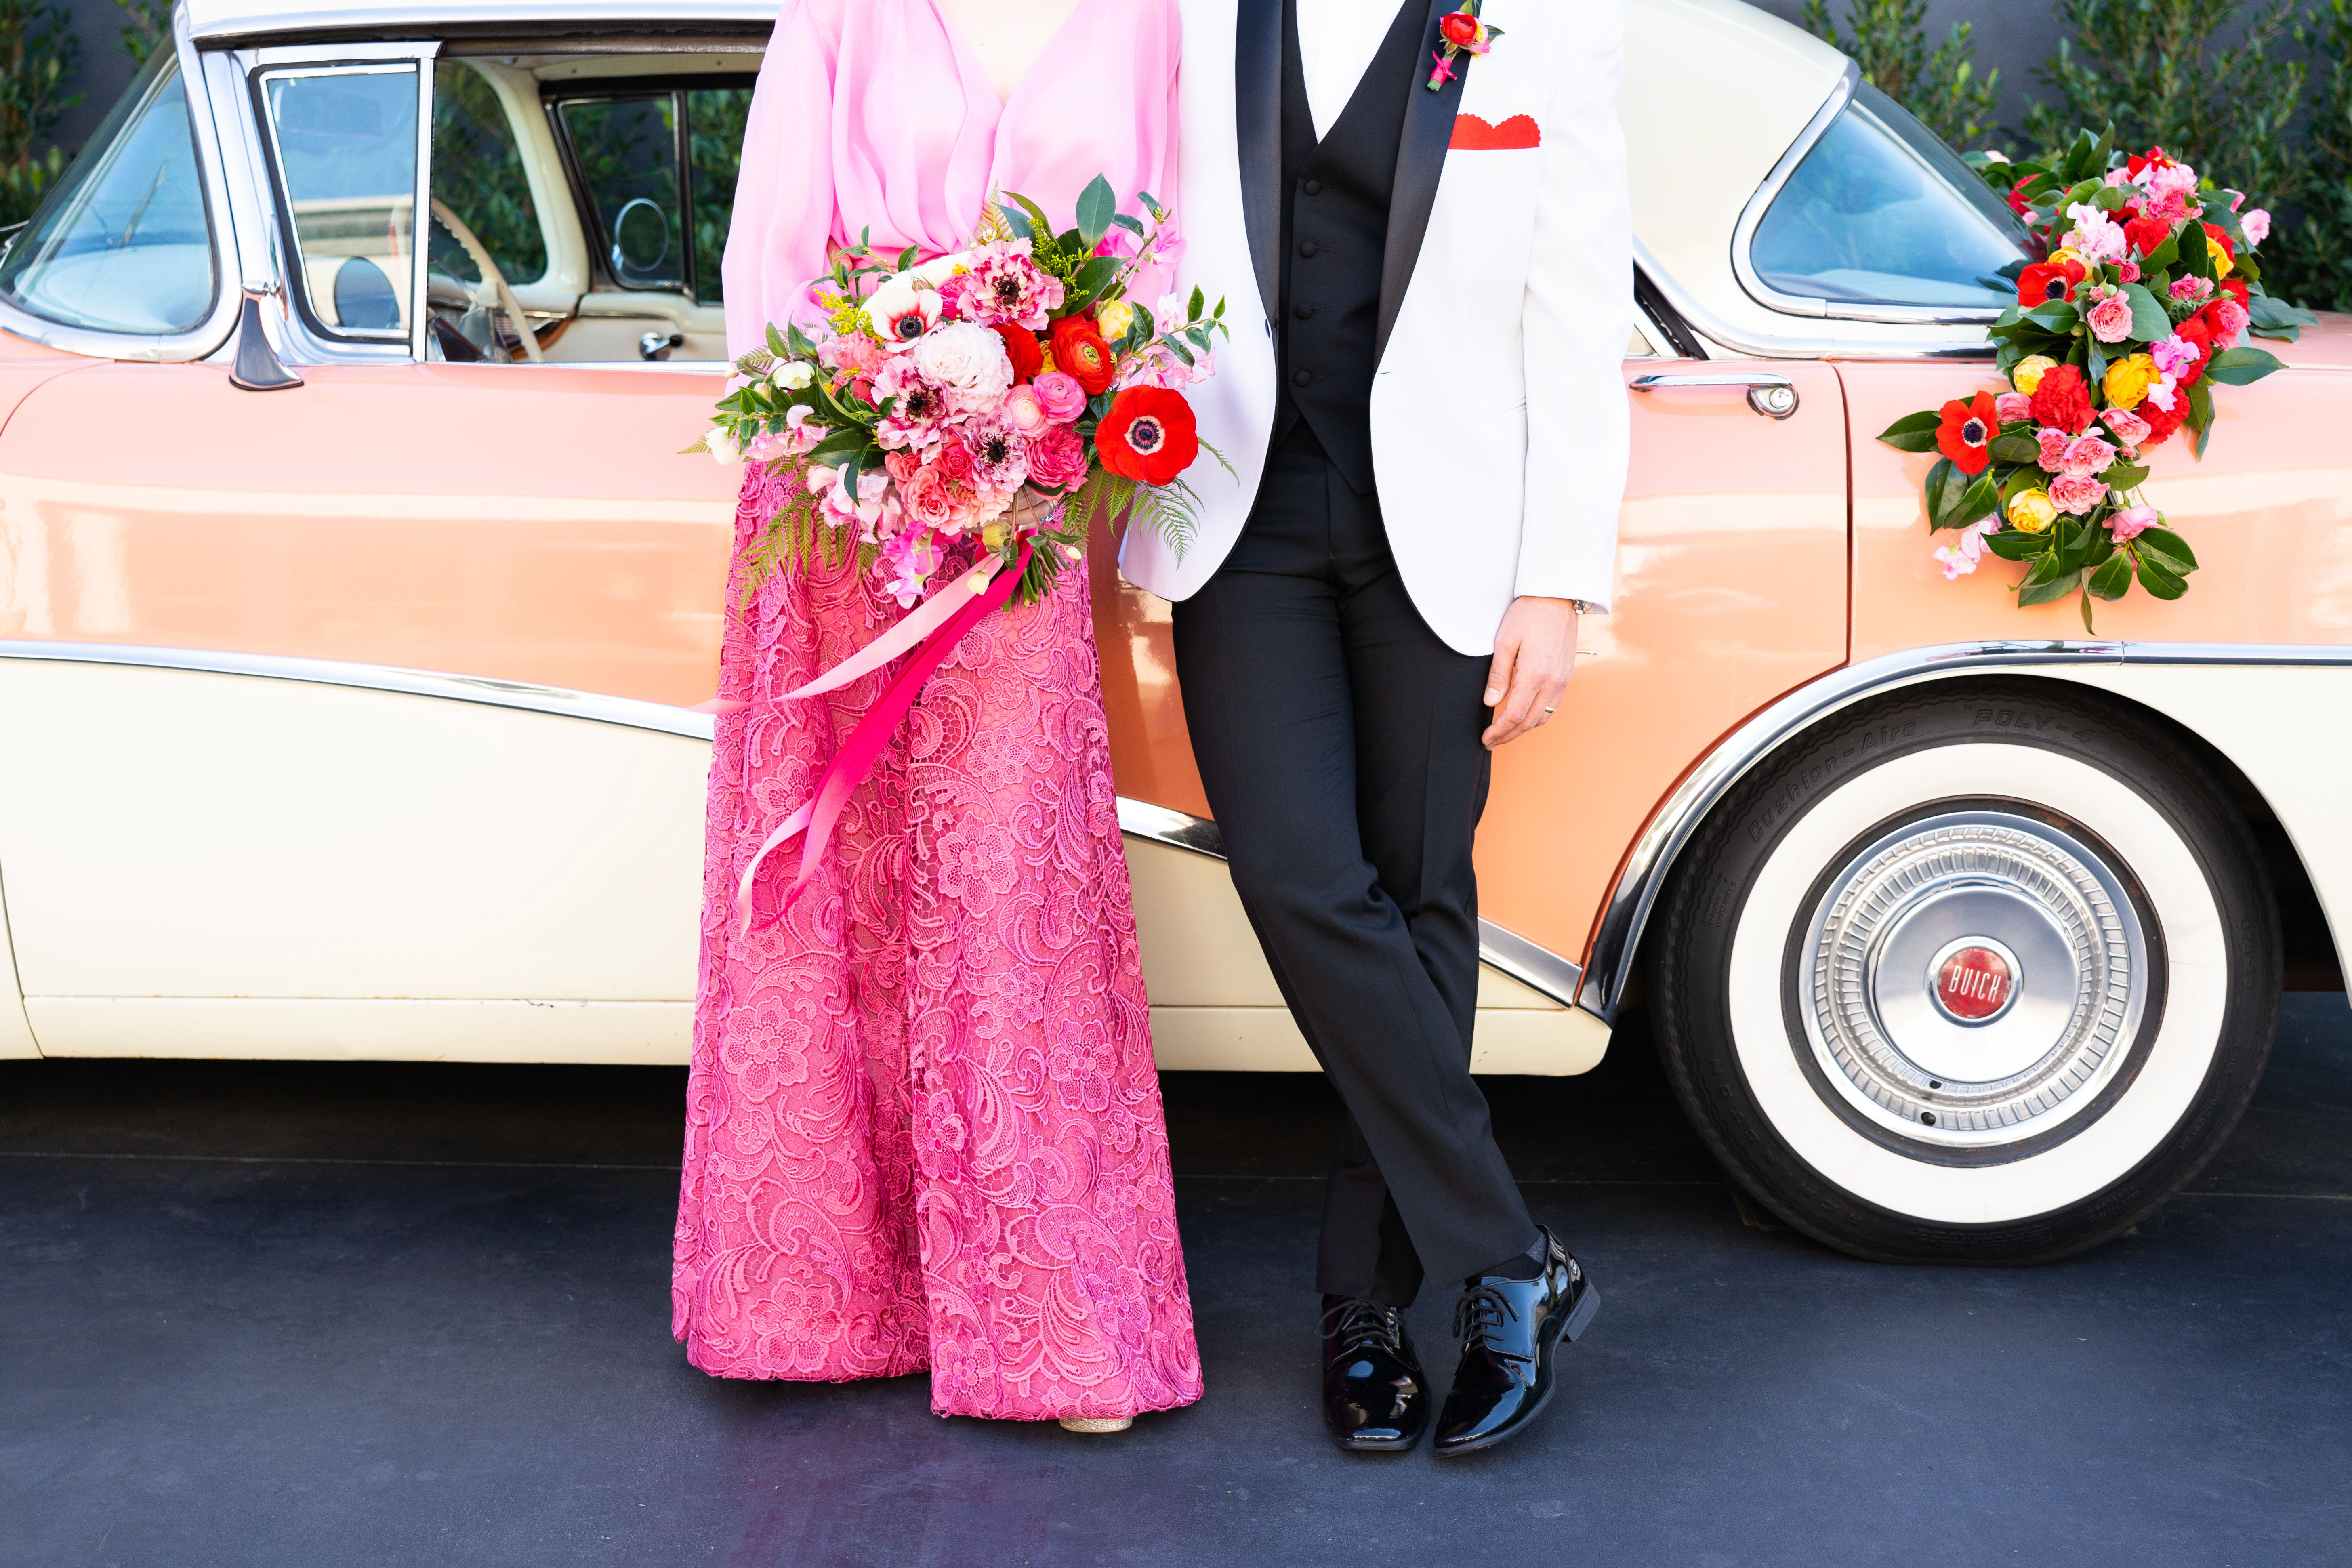 Our quirky sweet Valentine's Day couple wearing retro wedding attire to match their vintage getaway car adorned with a lush red and pink garland by Winston and Main.